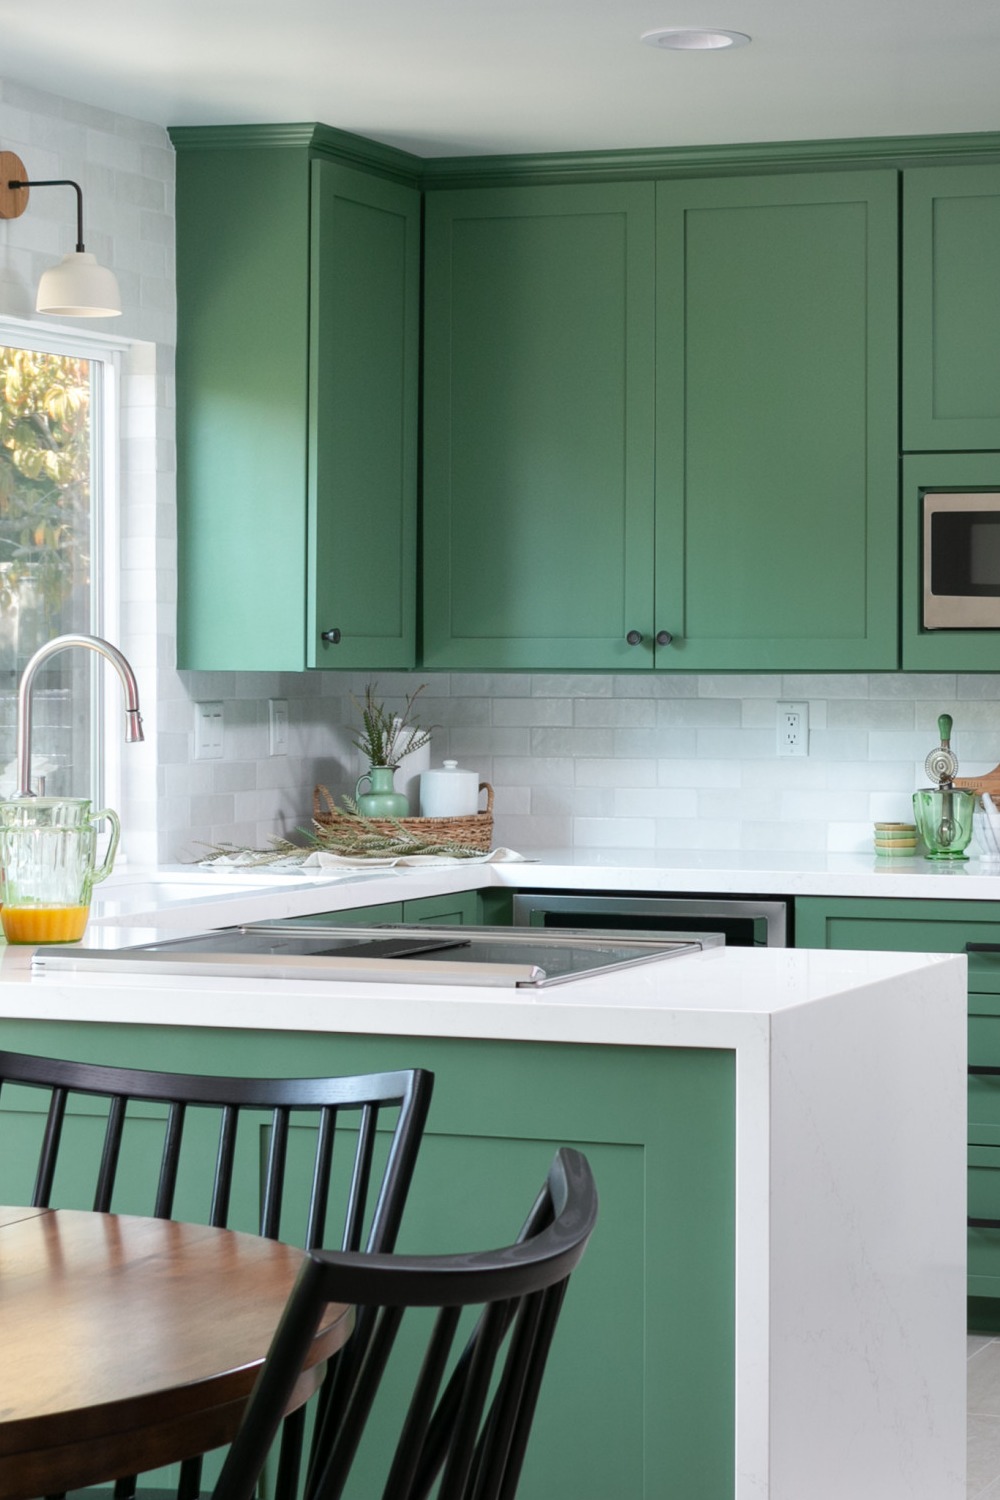 Green Kitchen Cabinets Shade Space Blue Paint Contrast Dark Green Room